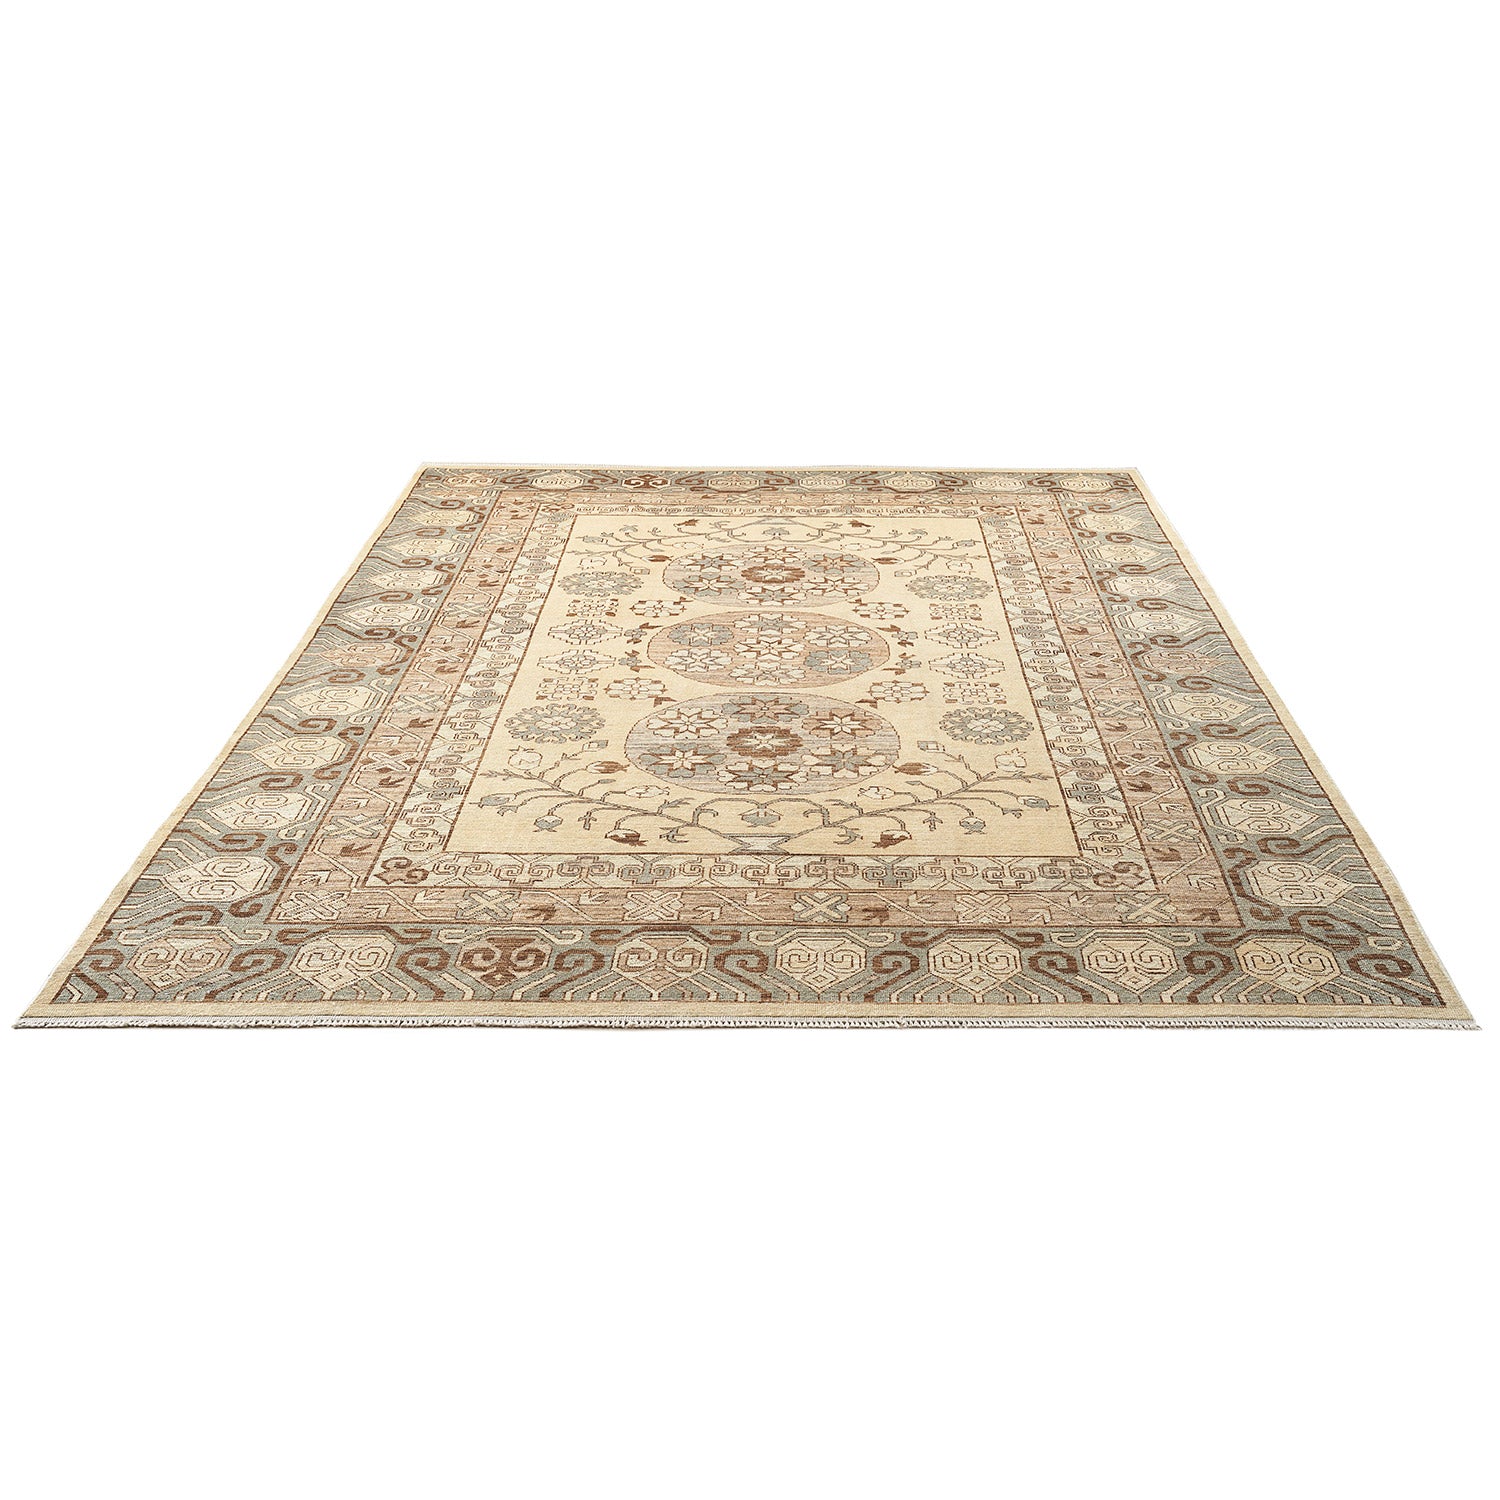 Exquisite rectangular area rug with symmetrical floral and geometric design.